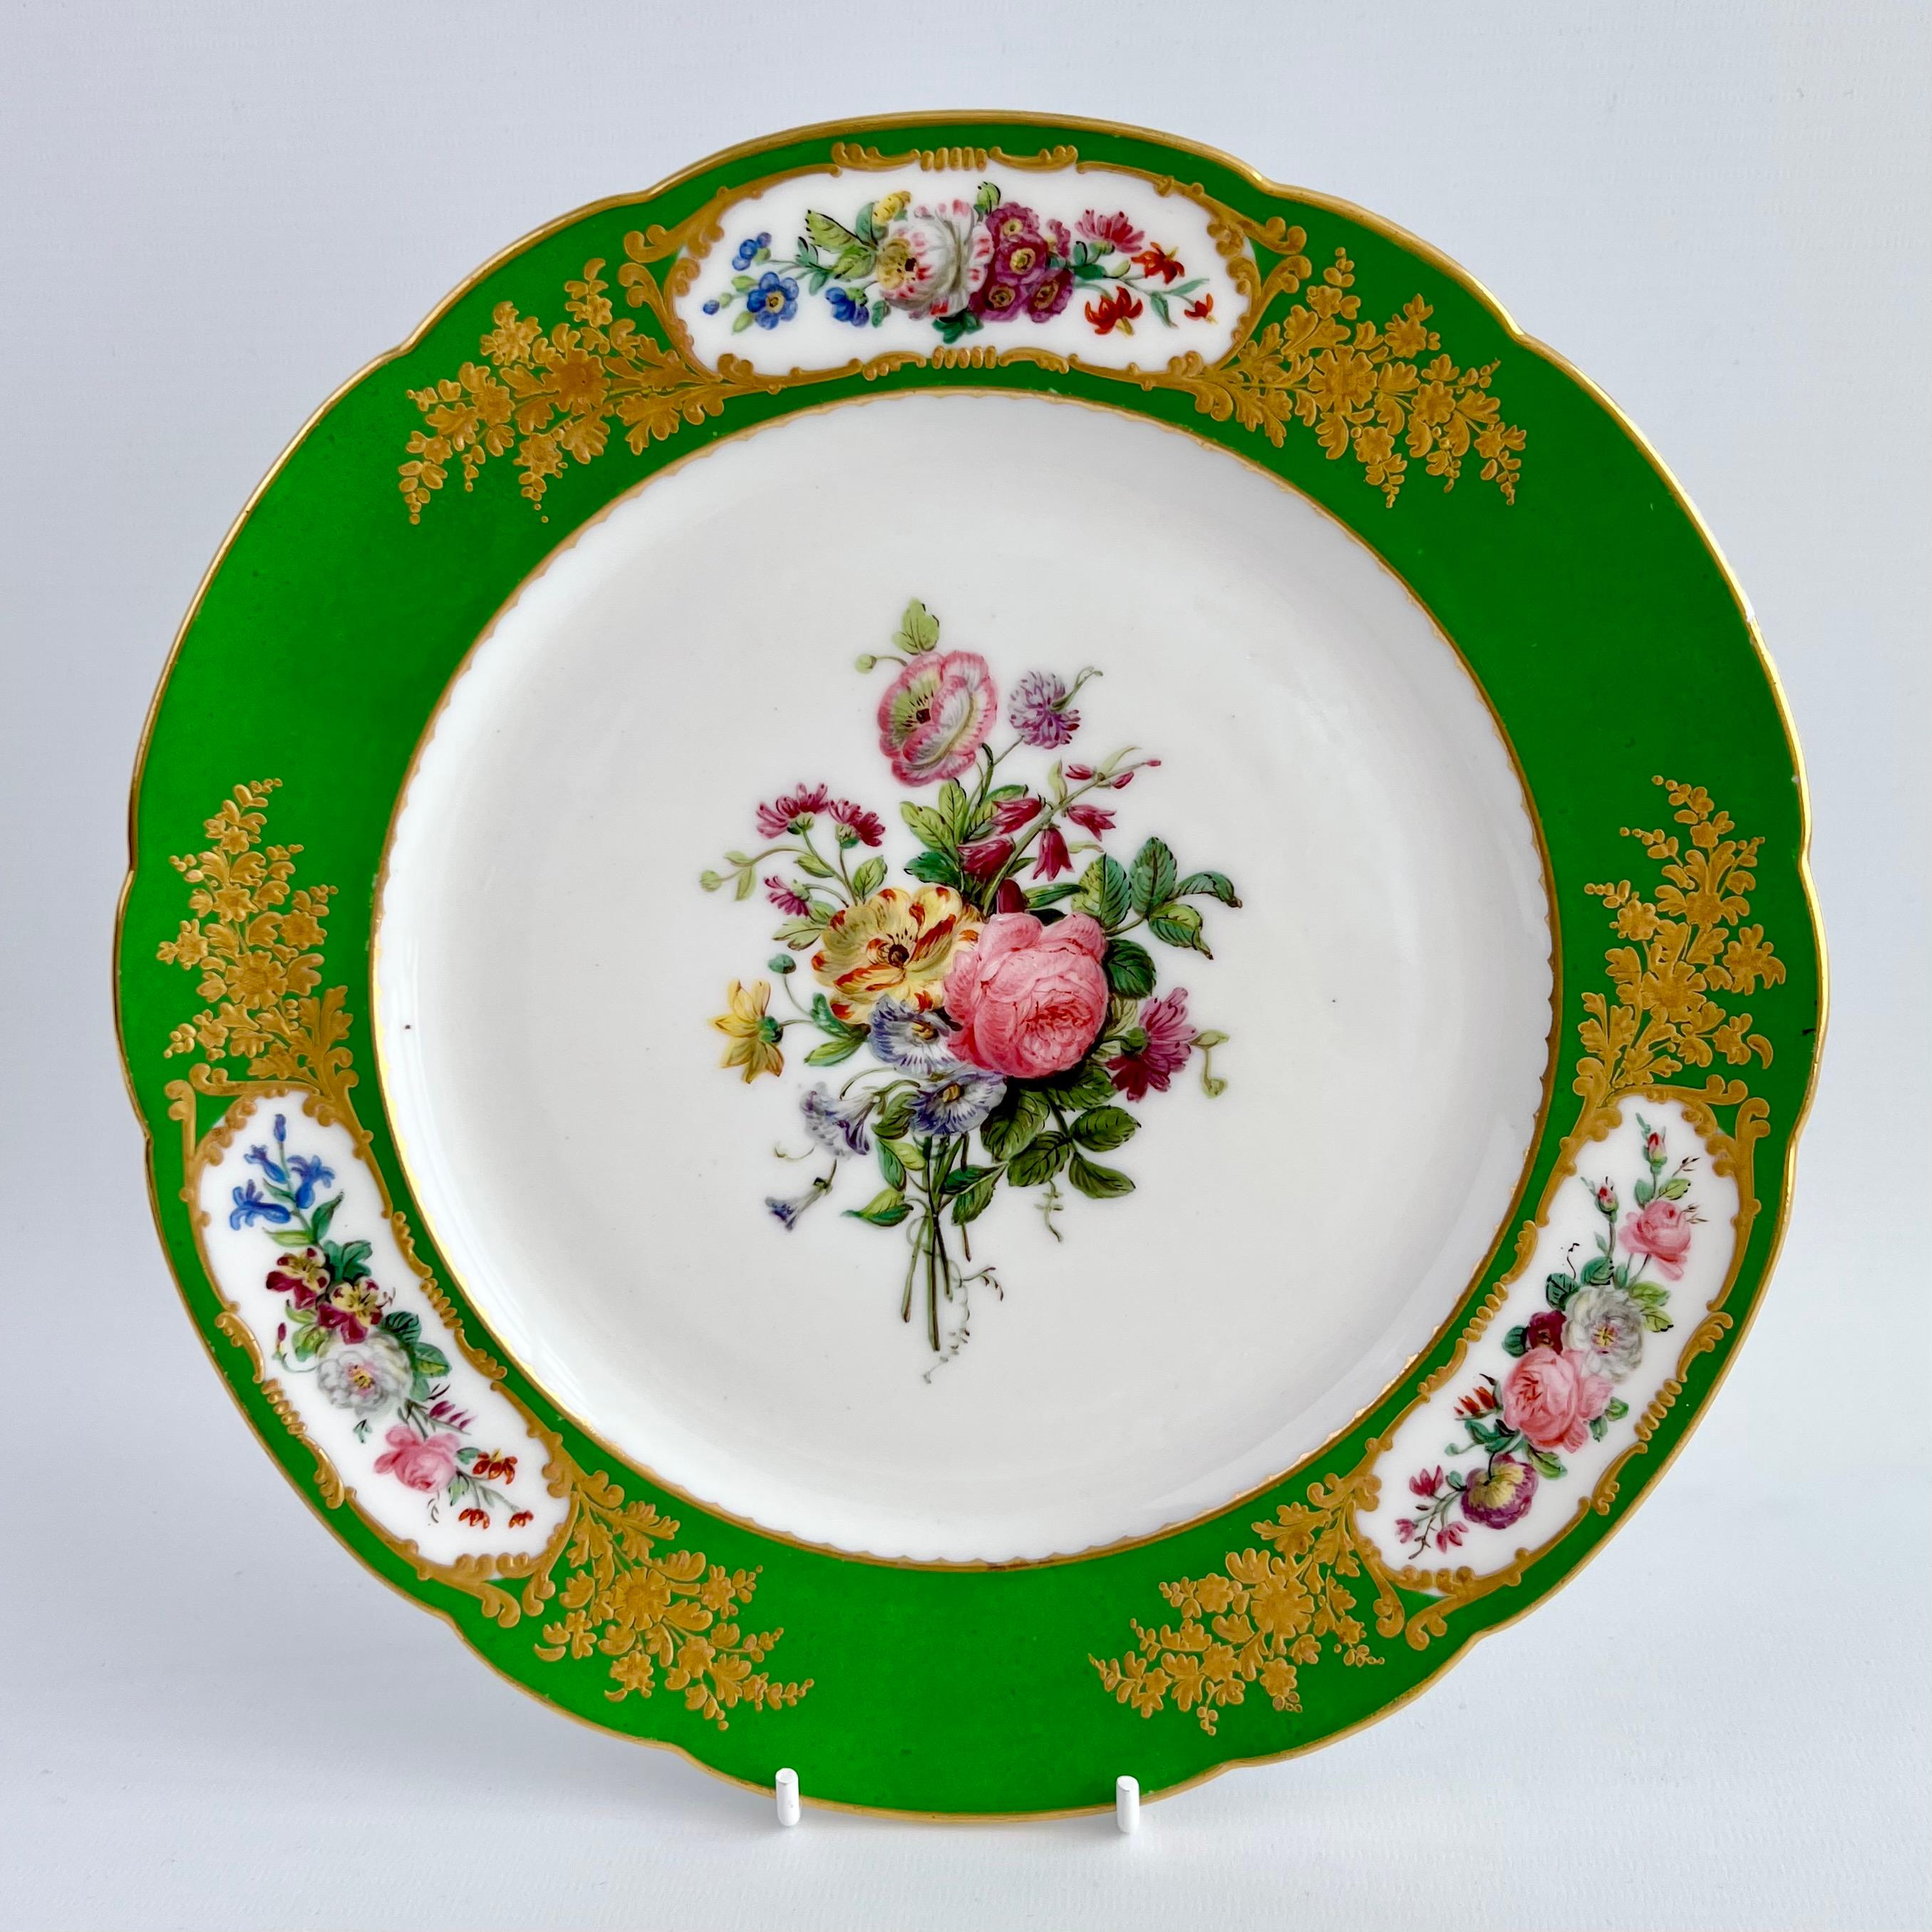 Mid-19th Century Vieux Paris Feuillet Set of 6 Plates, French Green, Gilt and Flowers, 1817-1834